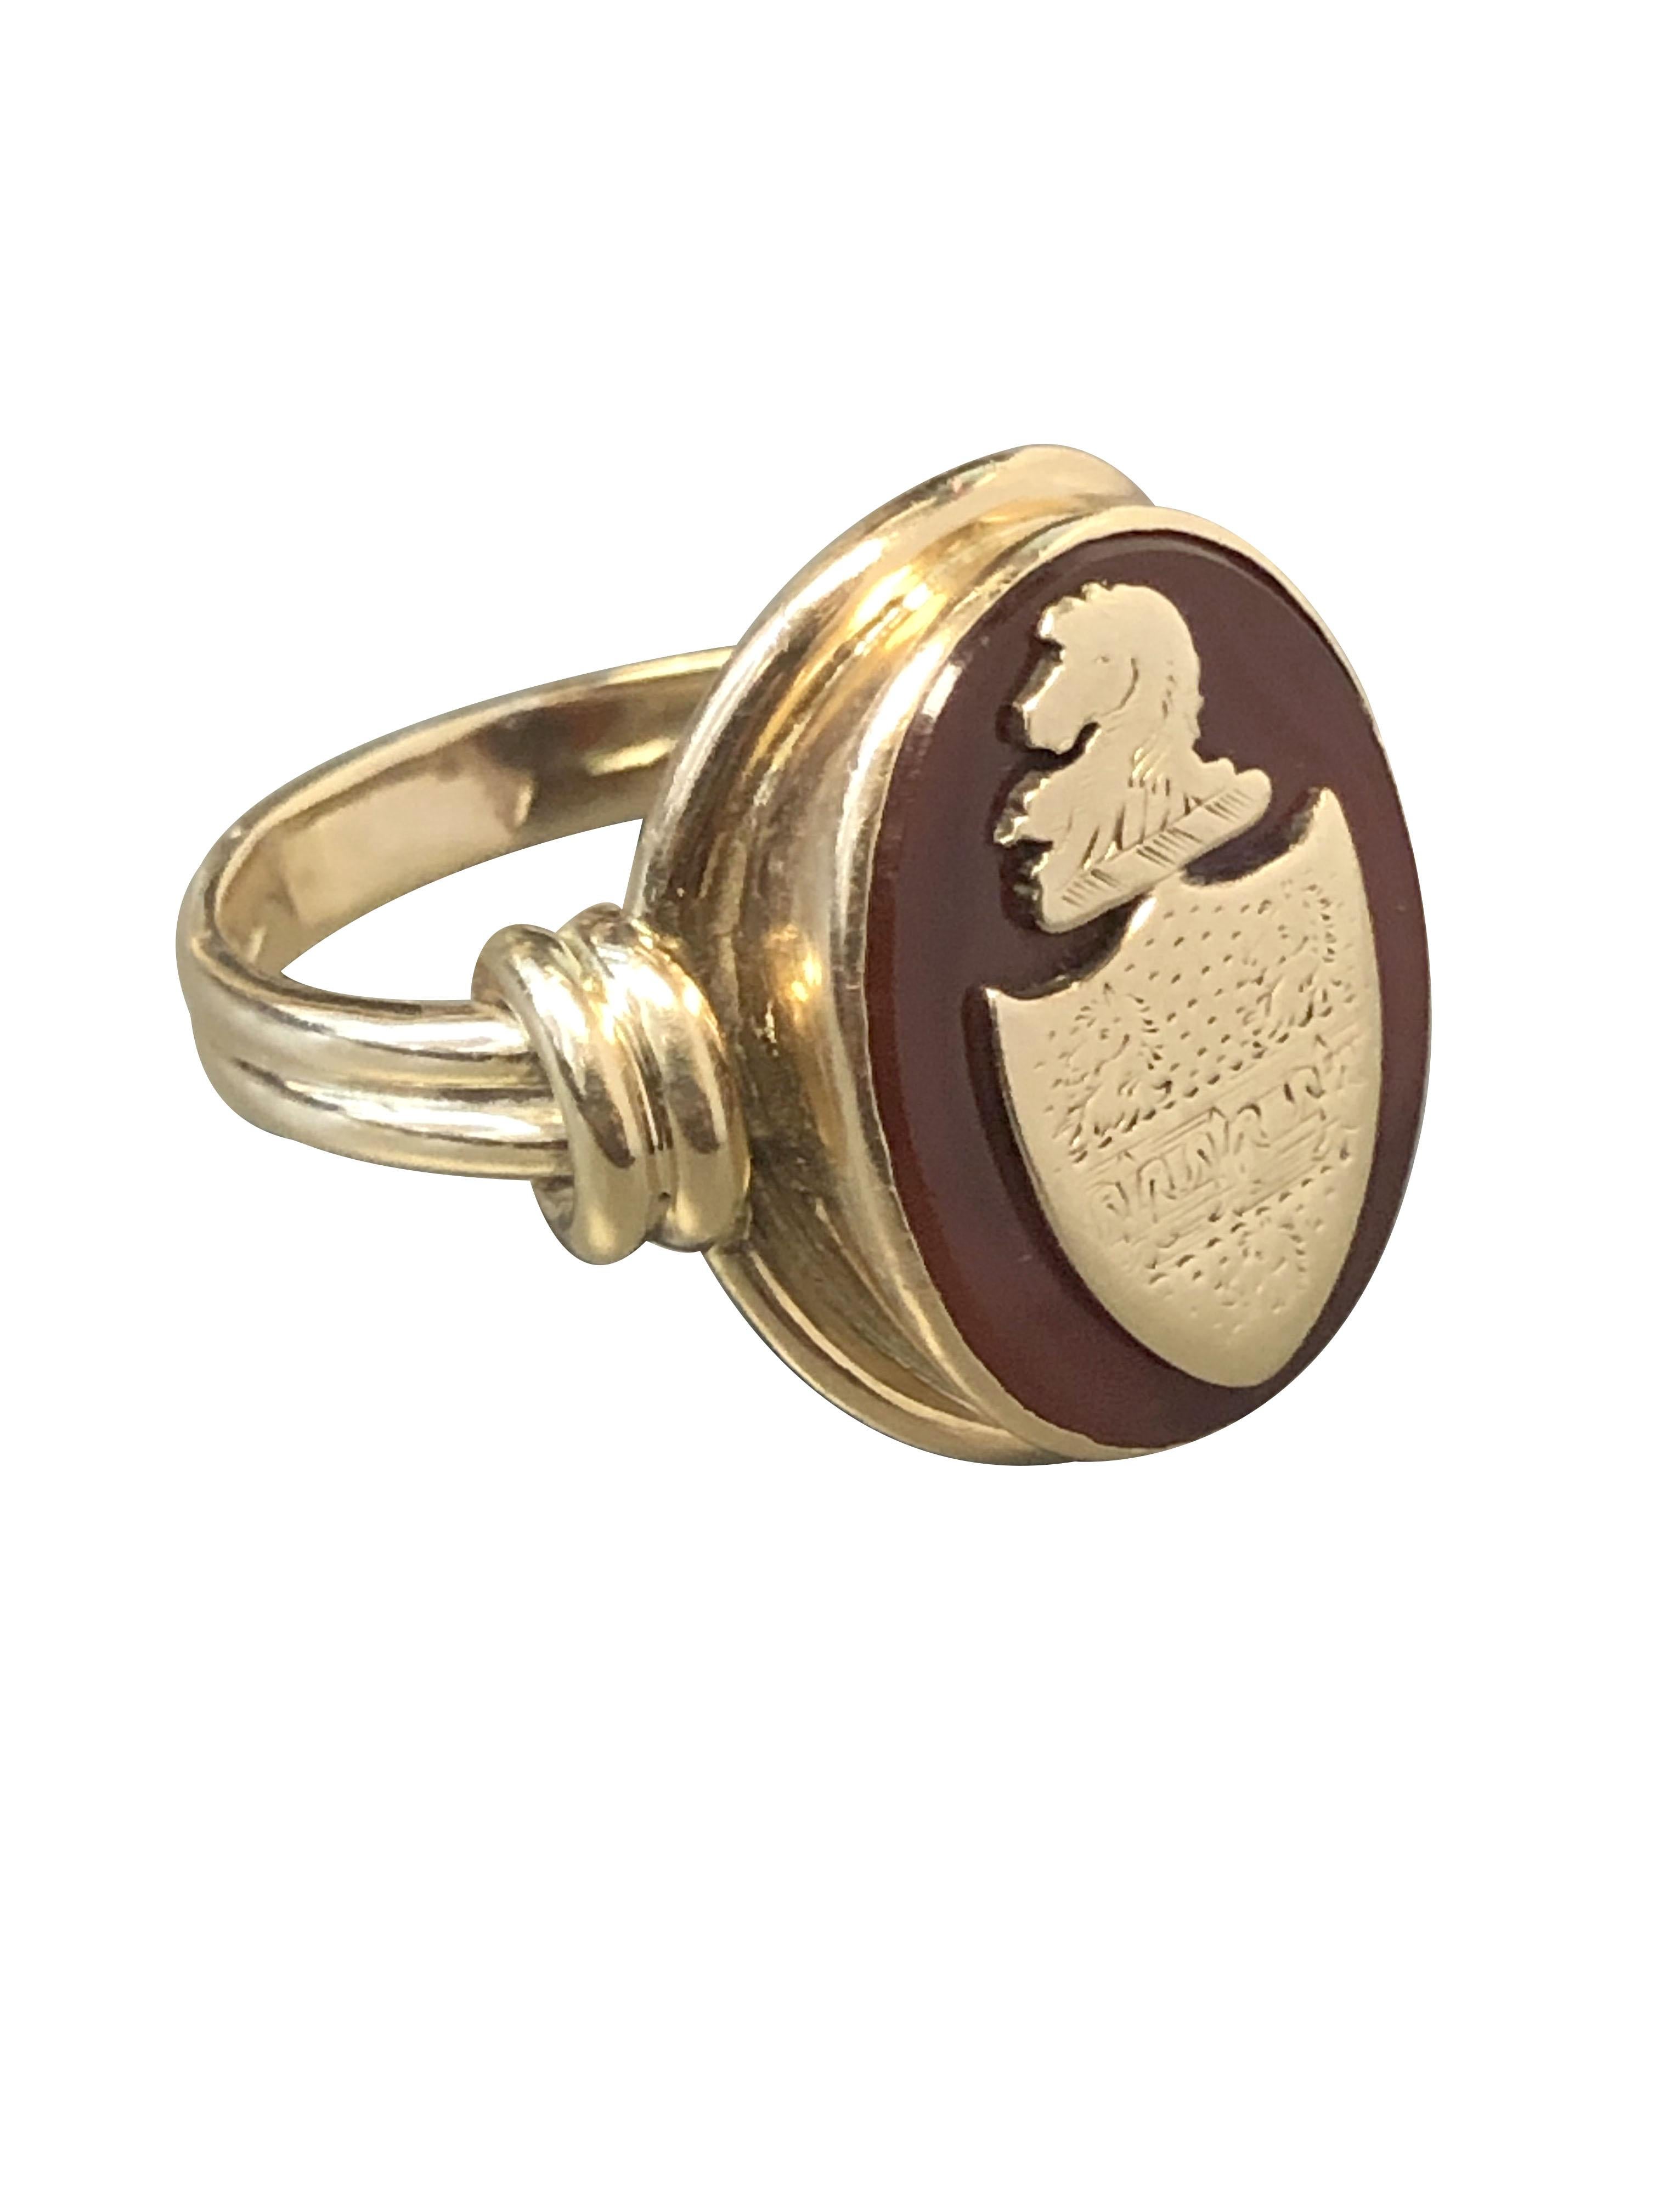 Antique Gold and Carnelian Signet Ring For Sale 3